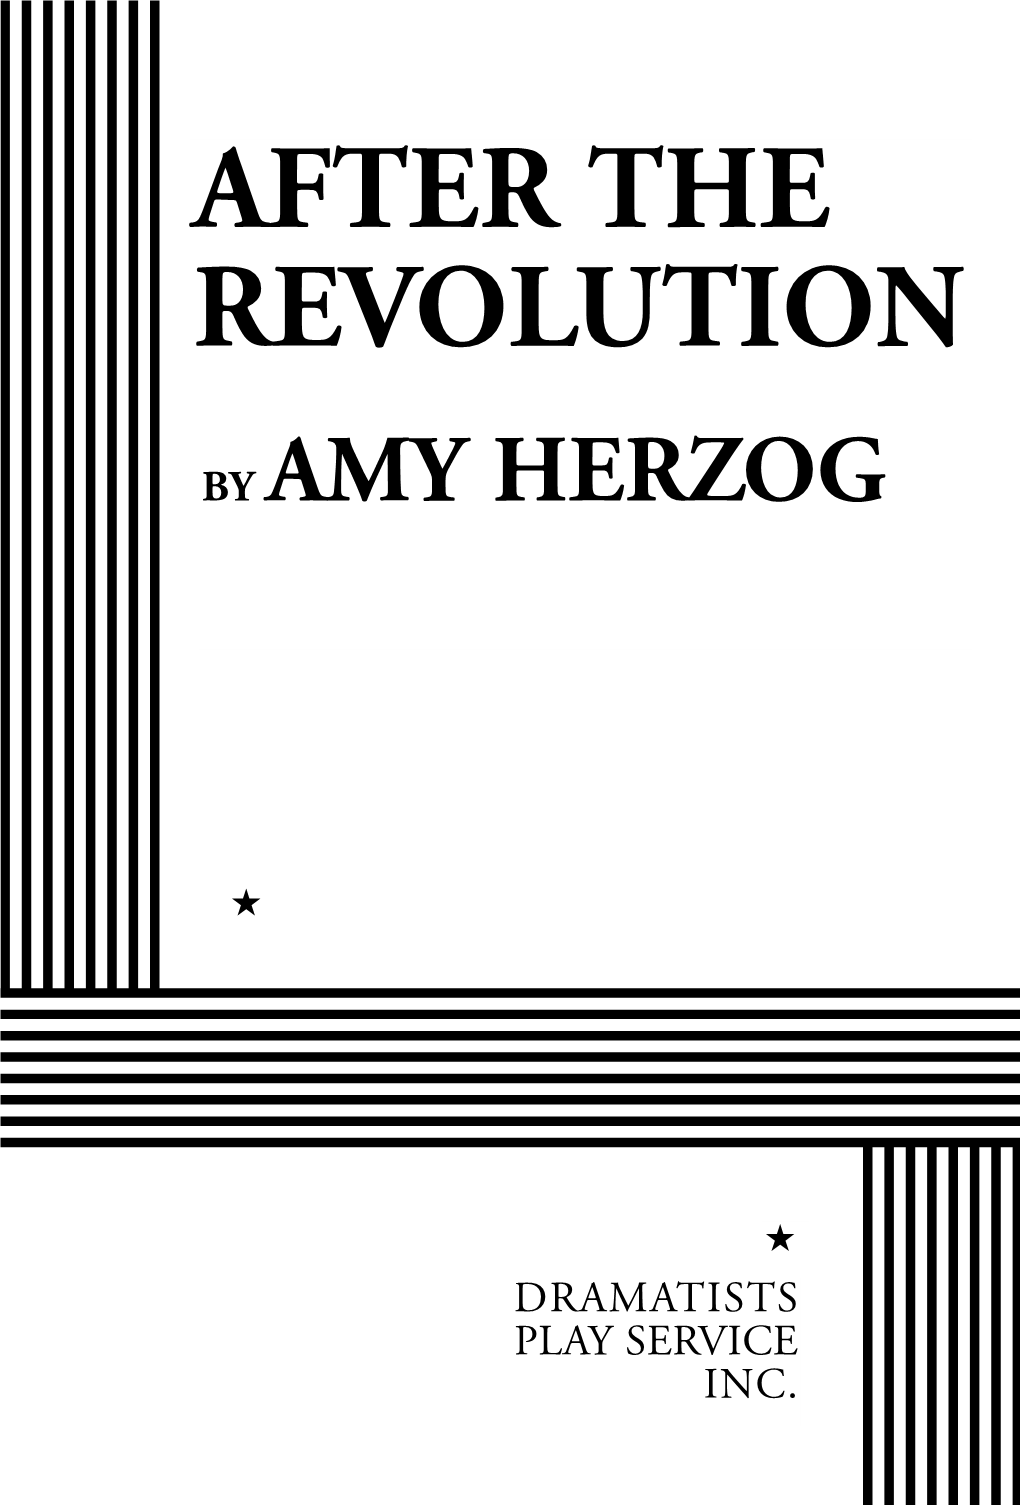 AFTER the REVOLUTION by Amy Herzog